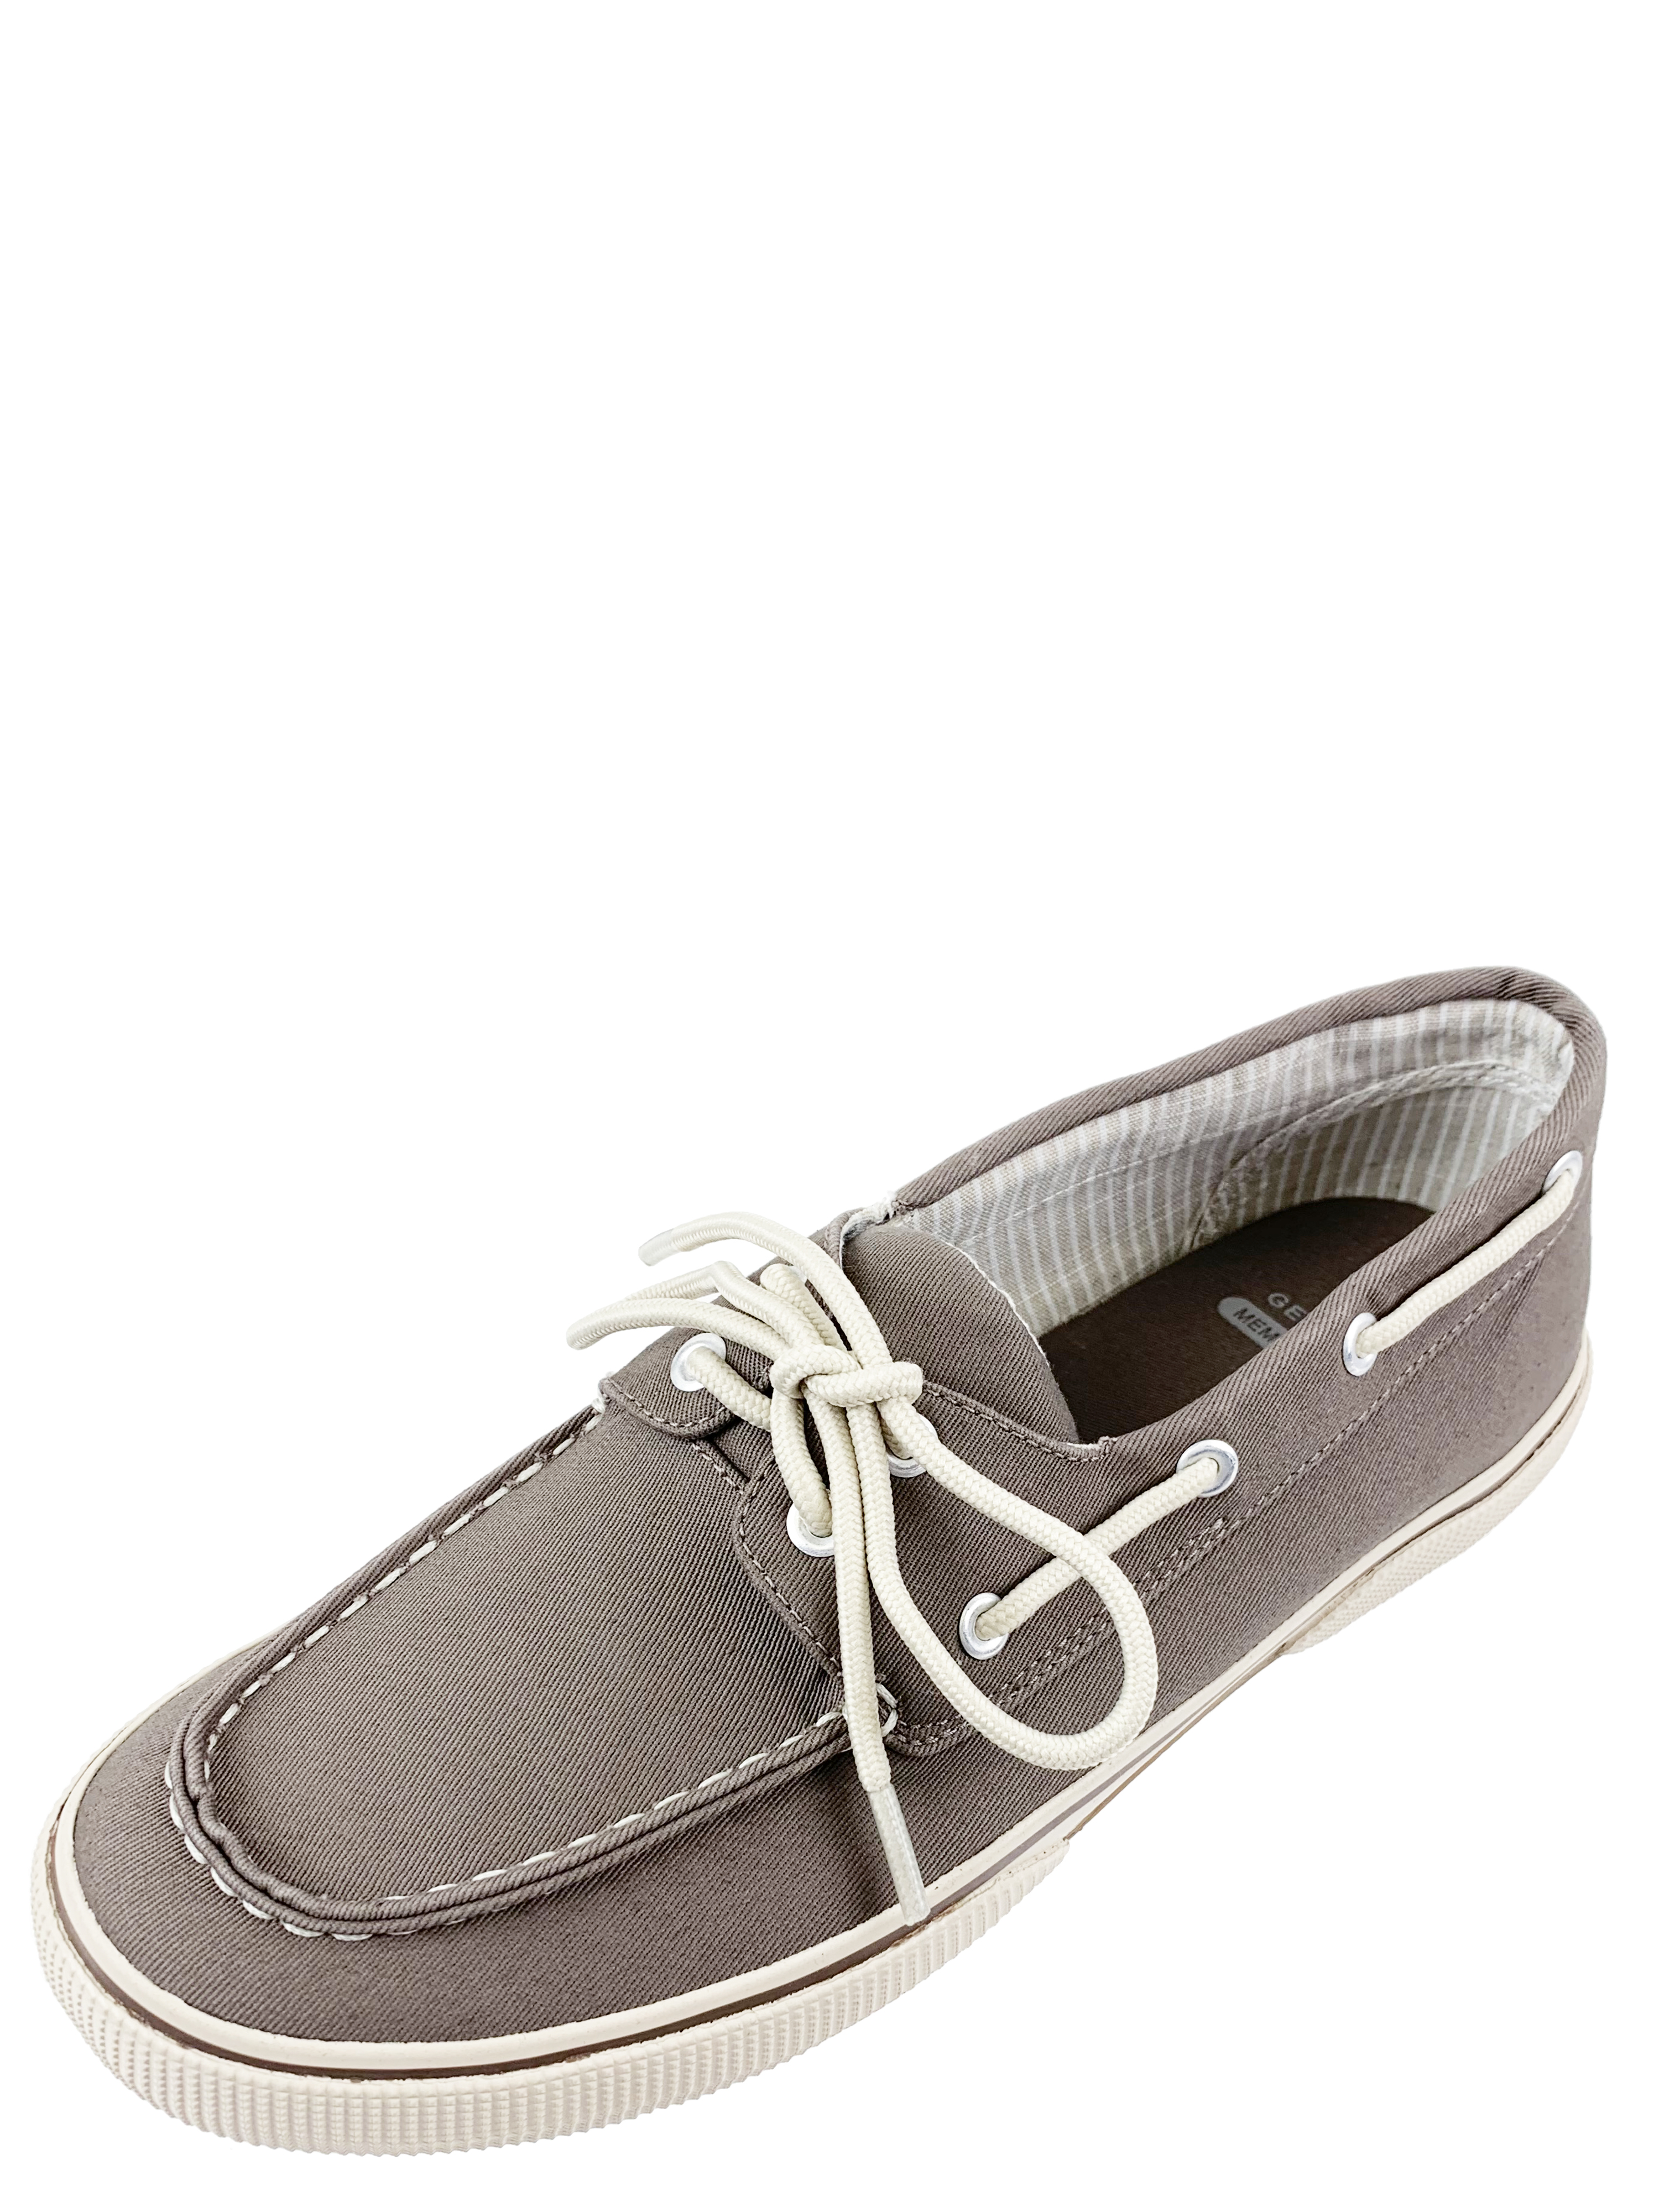 George Men's Classic Canvas Boat Shoe with Memory Foam - image 5 of 5